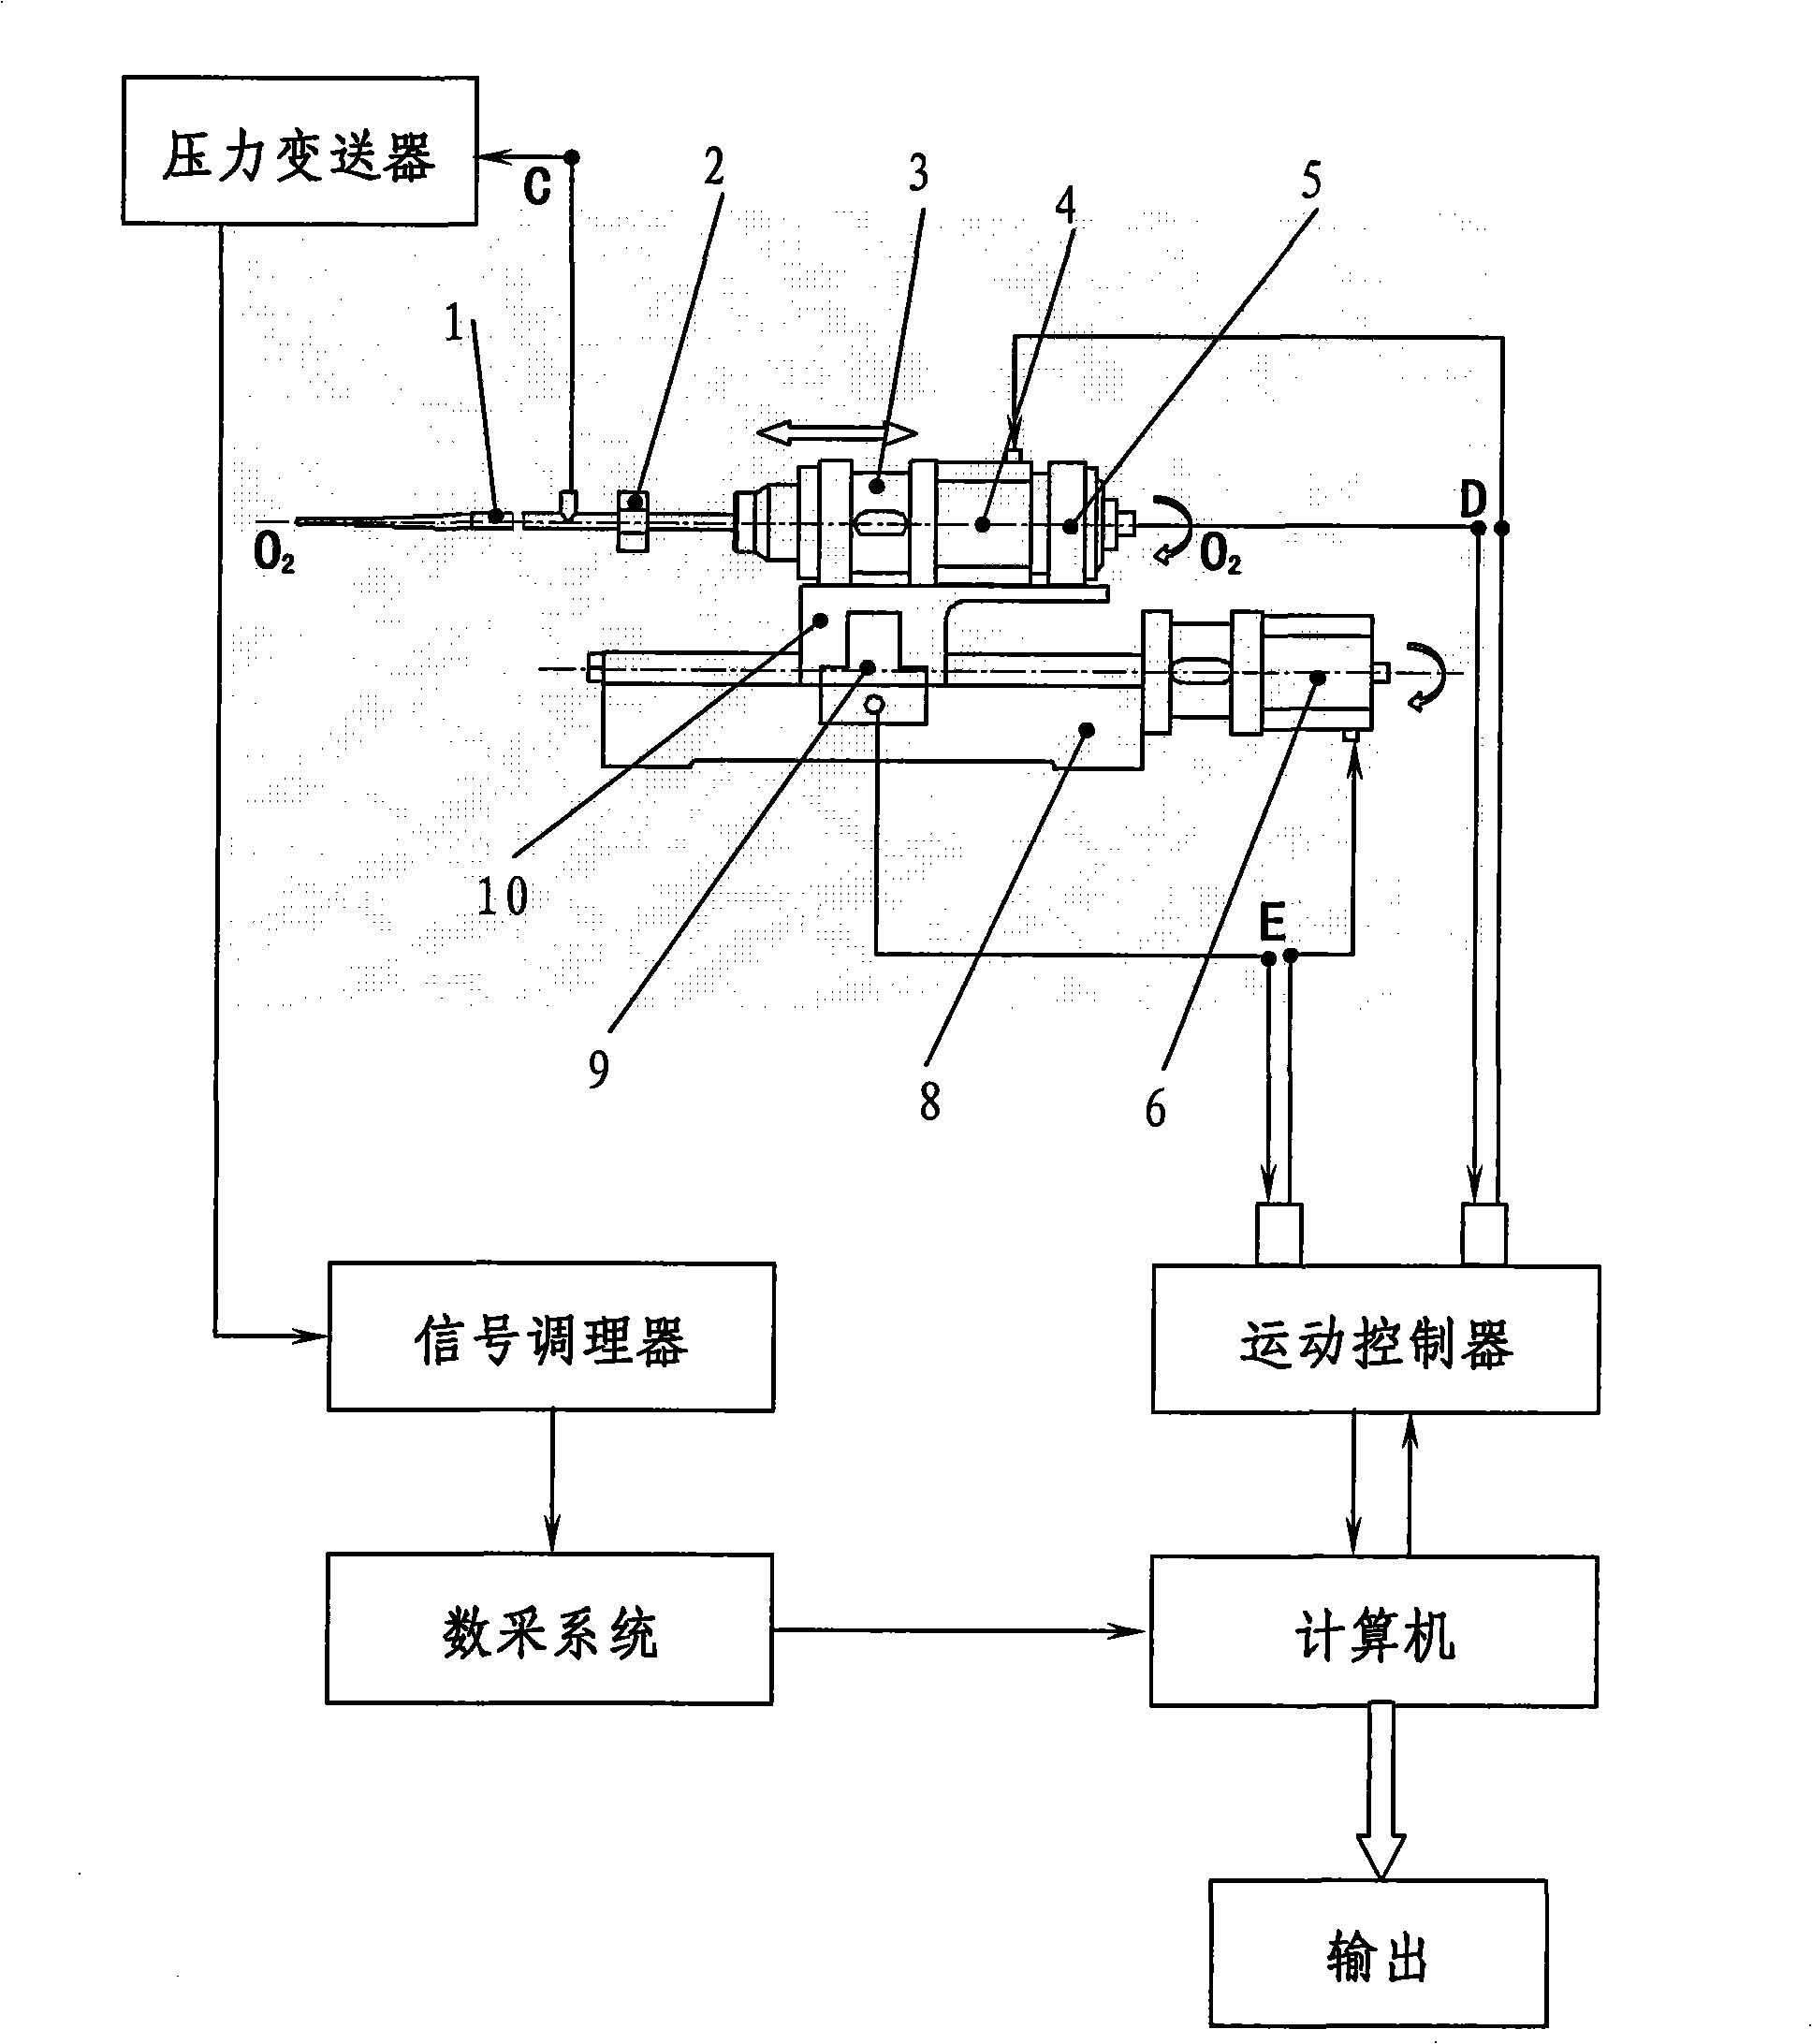 Automatic calibration and automatic measurement device of fluid flow test probe